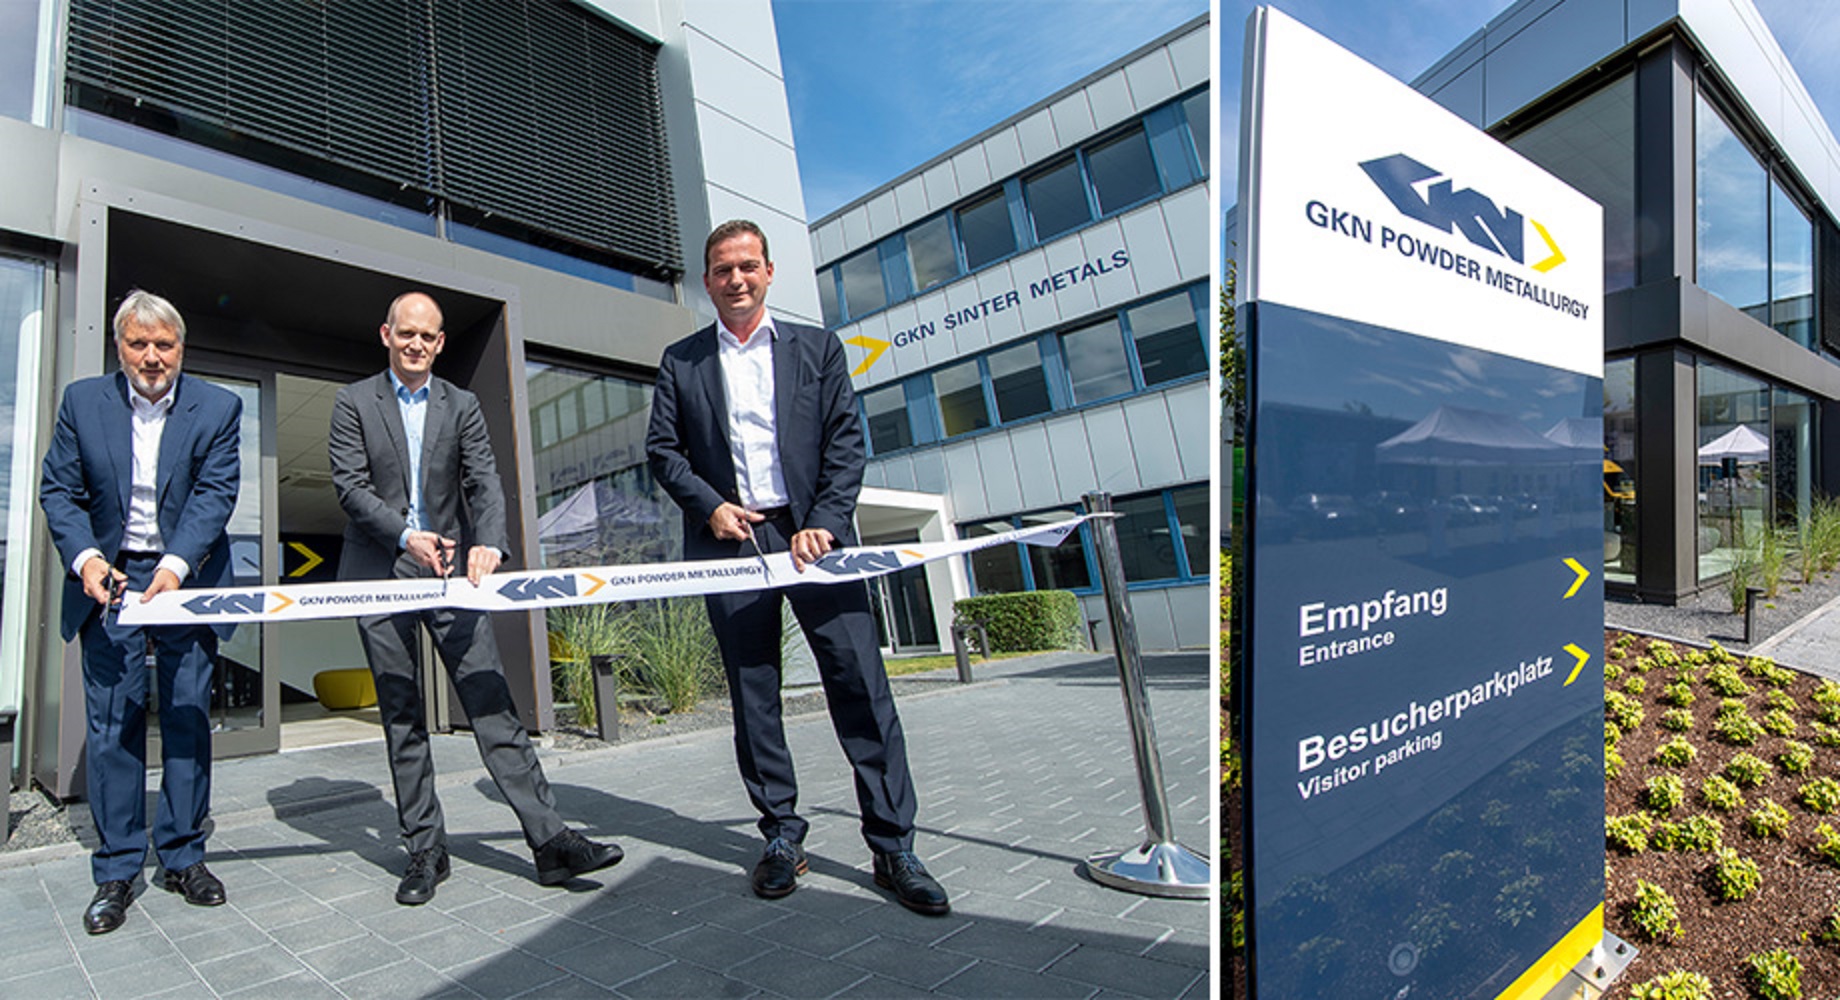 From left: Peter Oberparleiter, CEO of GKN Powder Metallurgy, Thorsten Wieres, plant director (and Guido Degen, president of additive manufacturing. GKN Powder Metallurgy.